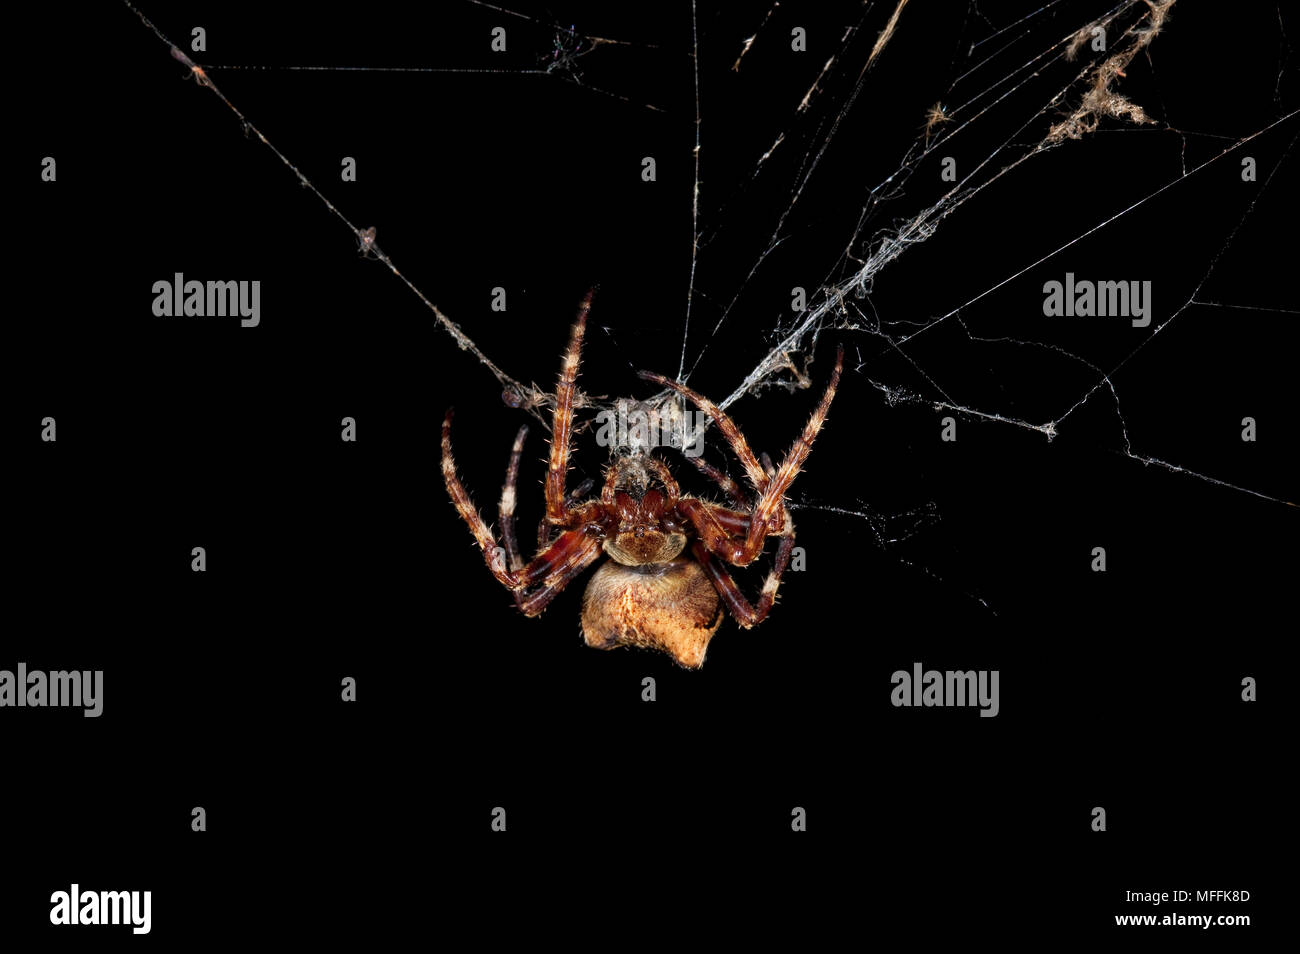 ORB WEAVER SPIDER (Araneus angulatus) A large and rare orb-weaving spider that builds webs of sometimes over 4 feet long Stock Photo